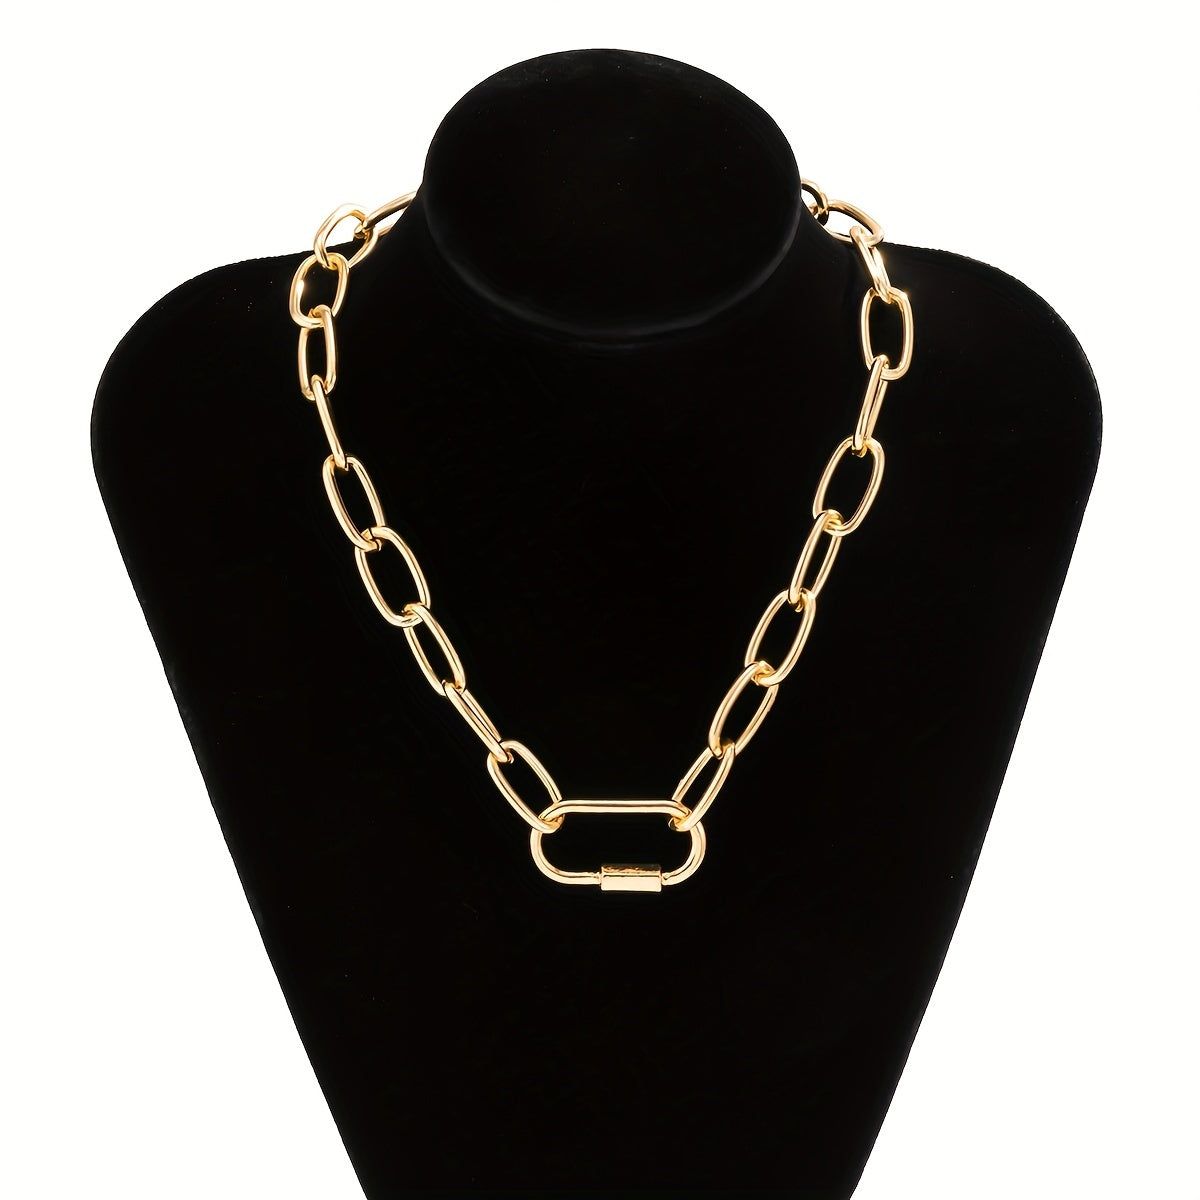 Hip Hop Golden Link Chain Necklace For Women Collar Statement Big Cuban Chunky Thick Necklace